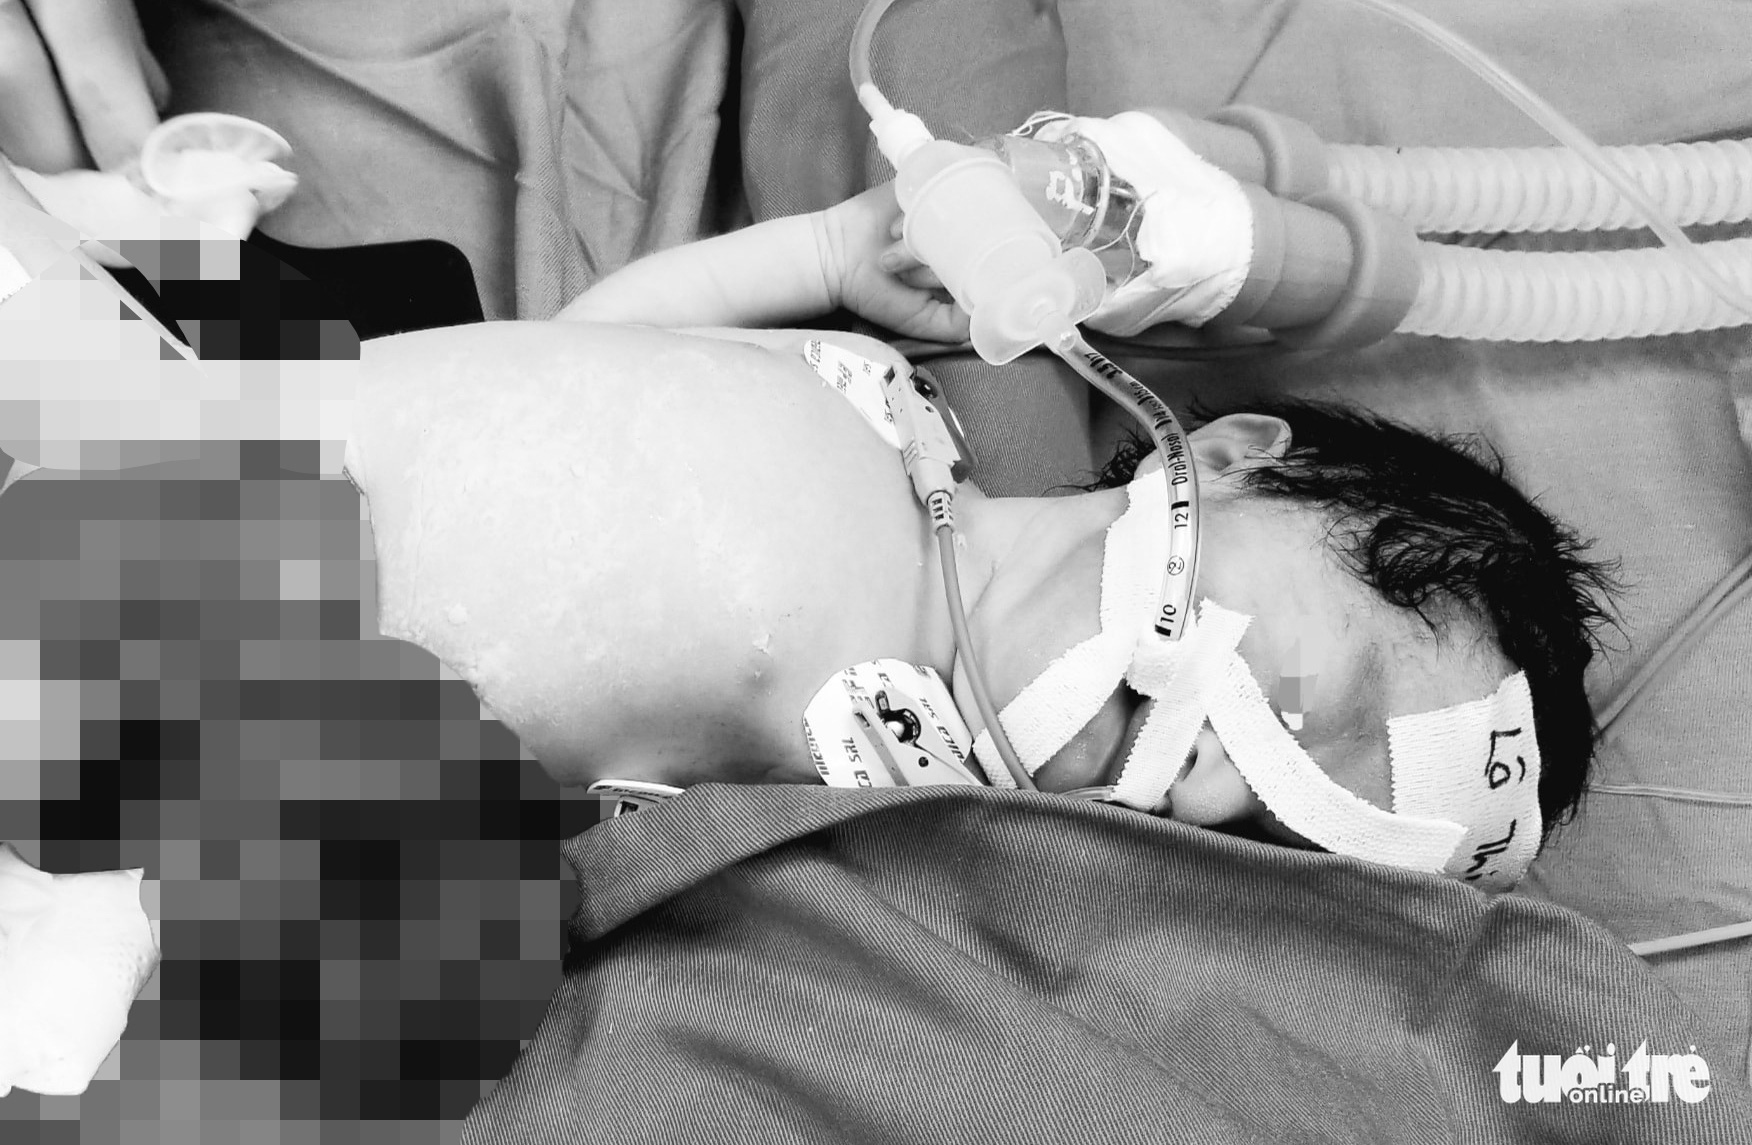 Doctors save newborn with organs outside of belly in Vietnam